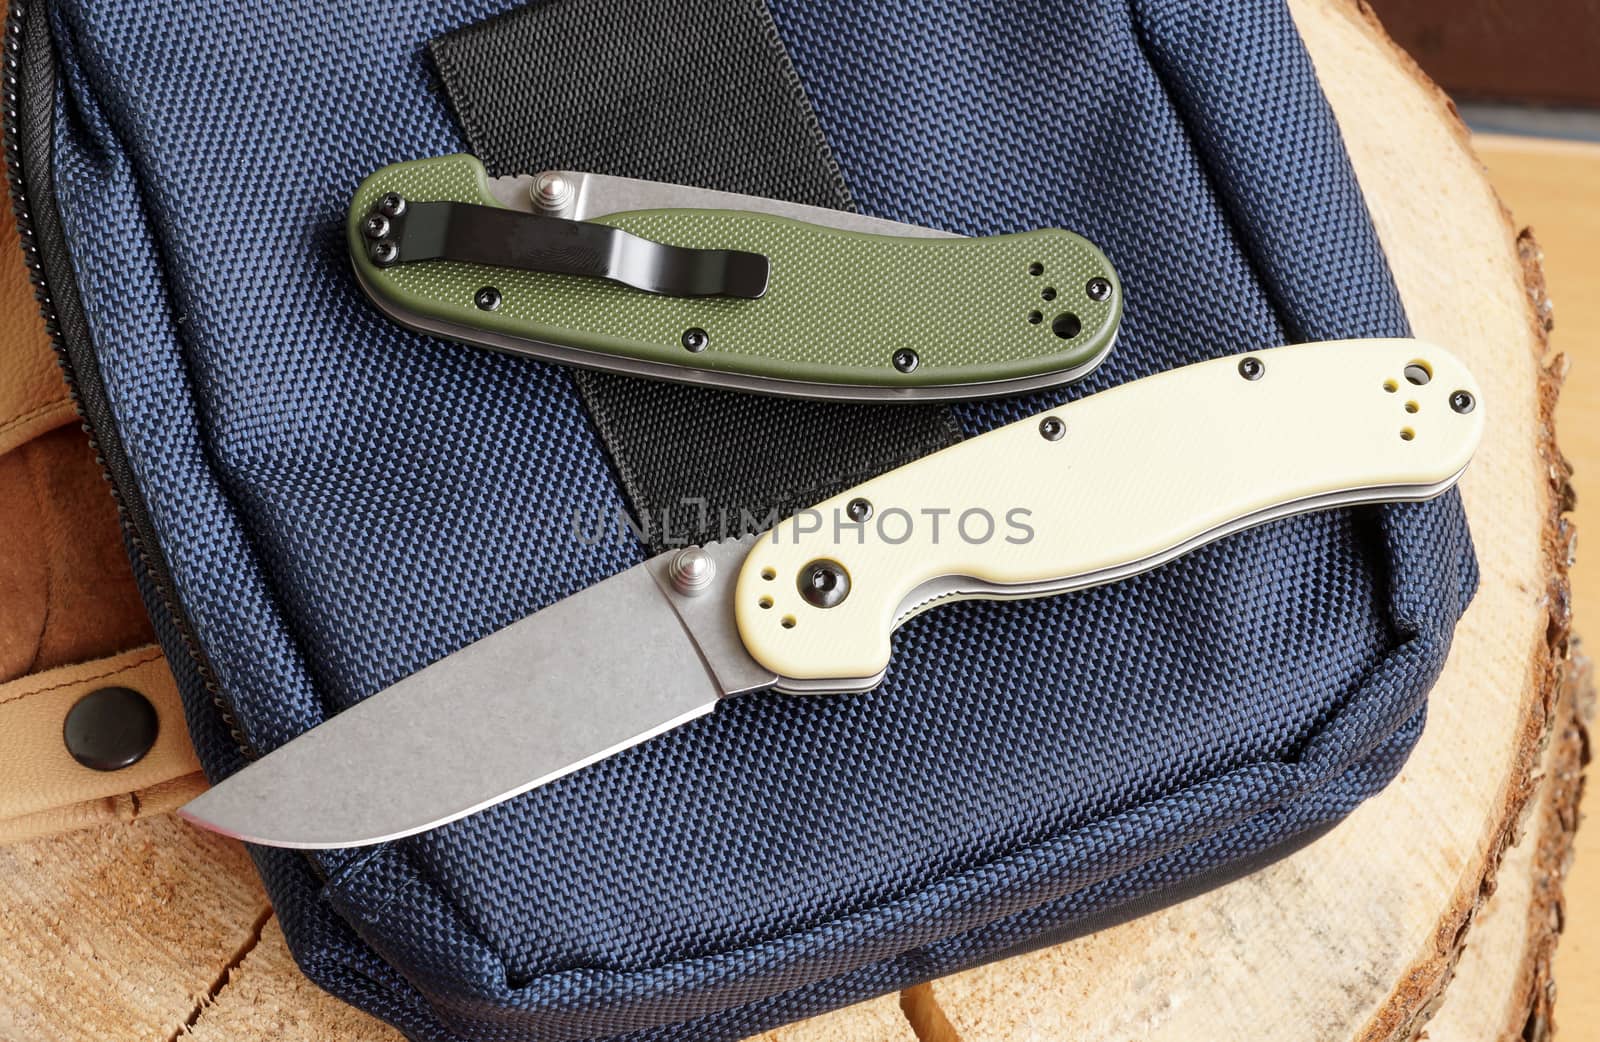 Knife the folding exclusive by Vadimdem